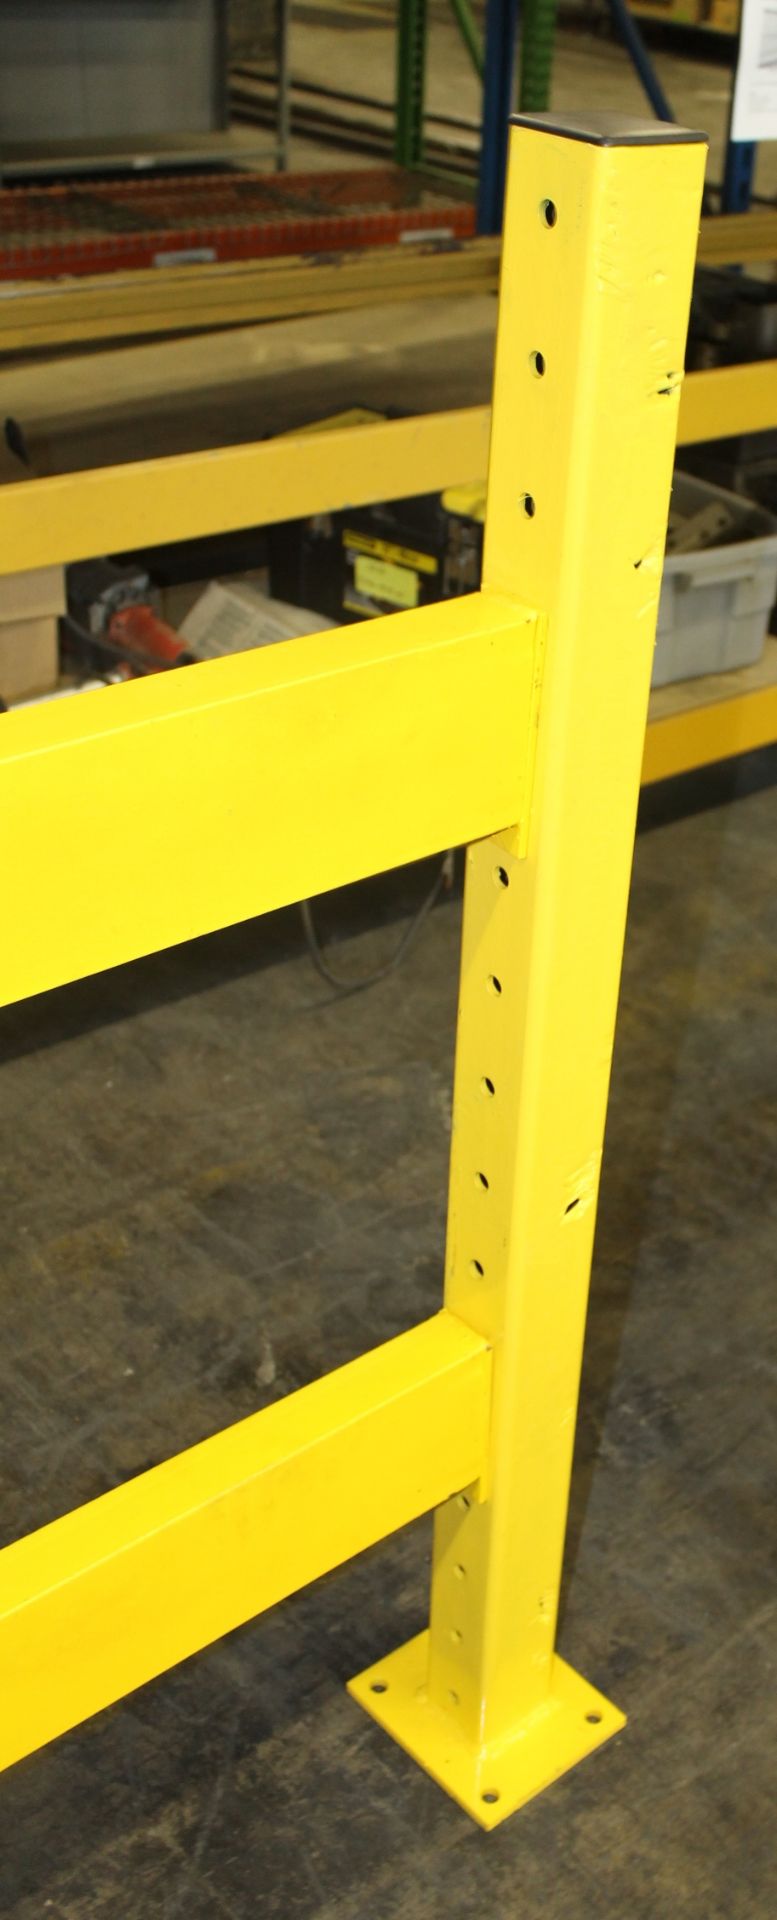 97.25 FT LONG AND 42" TALL GUARD RAIL,  OVERALL SIZE OF ONE SECTION: 100"W X 5"T X 2"D, INCLUDES: 13 - Image 3 of 3